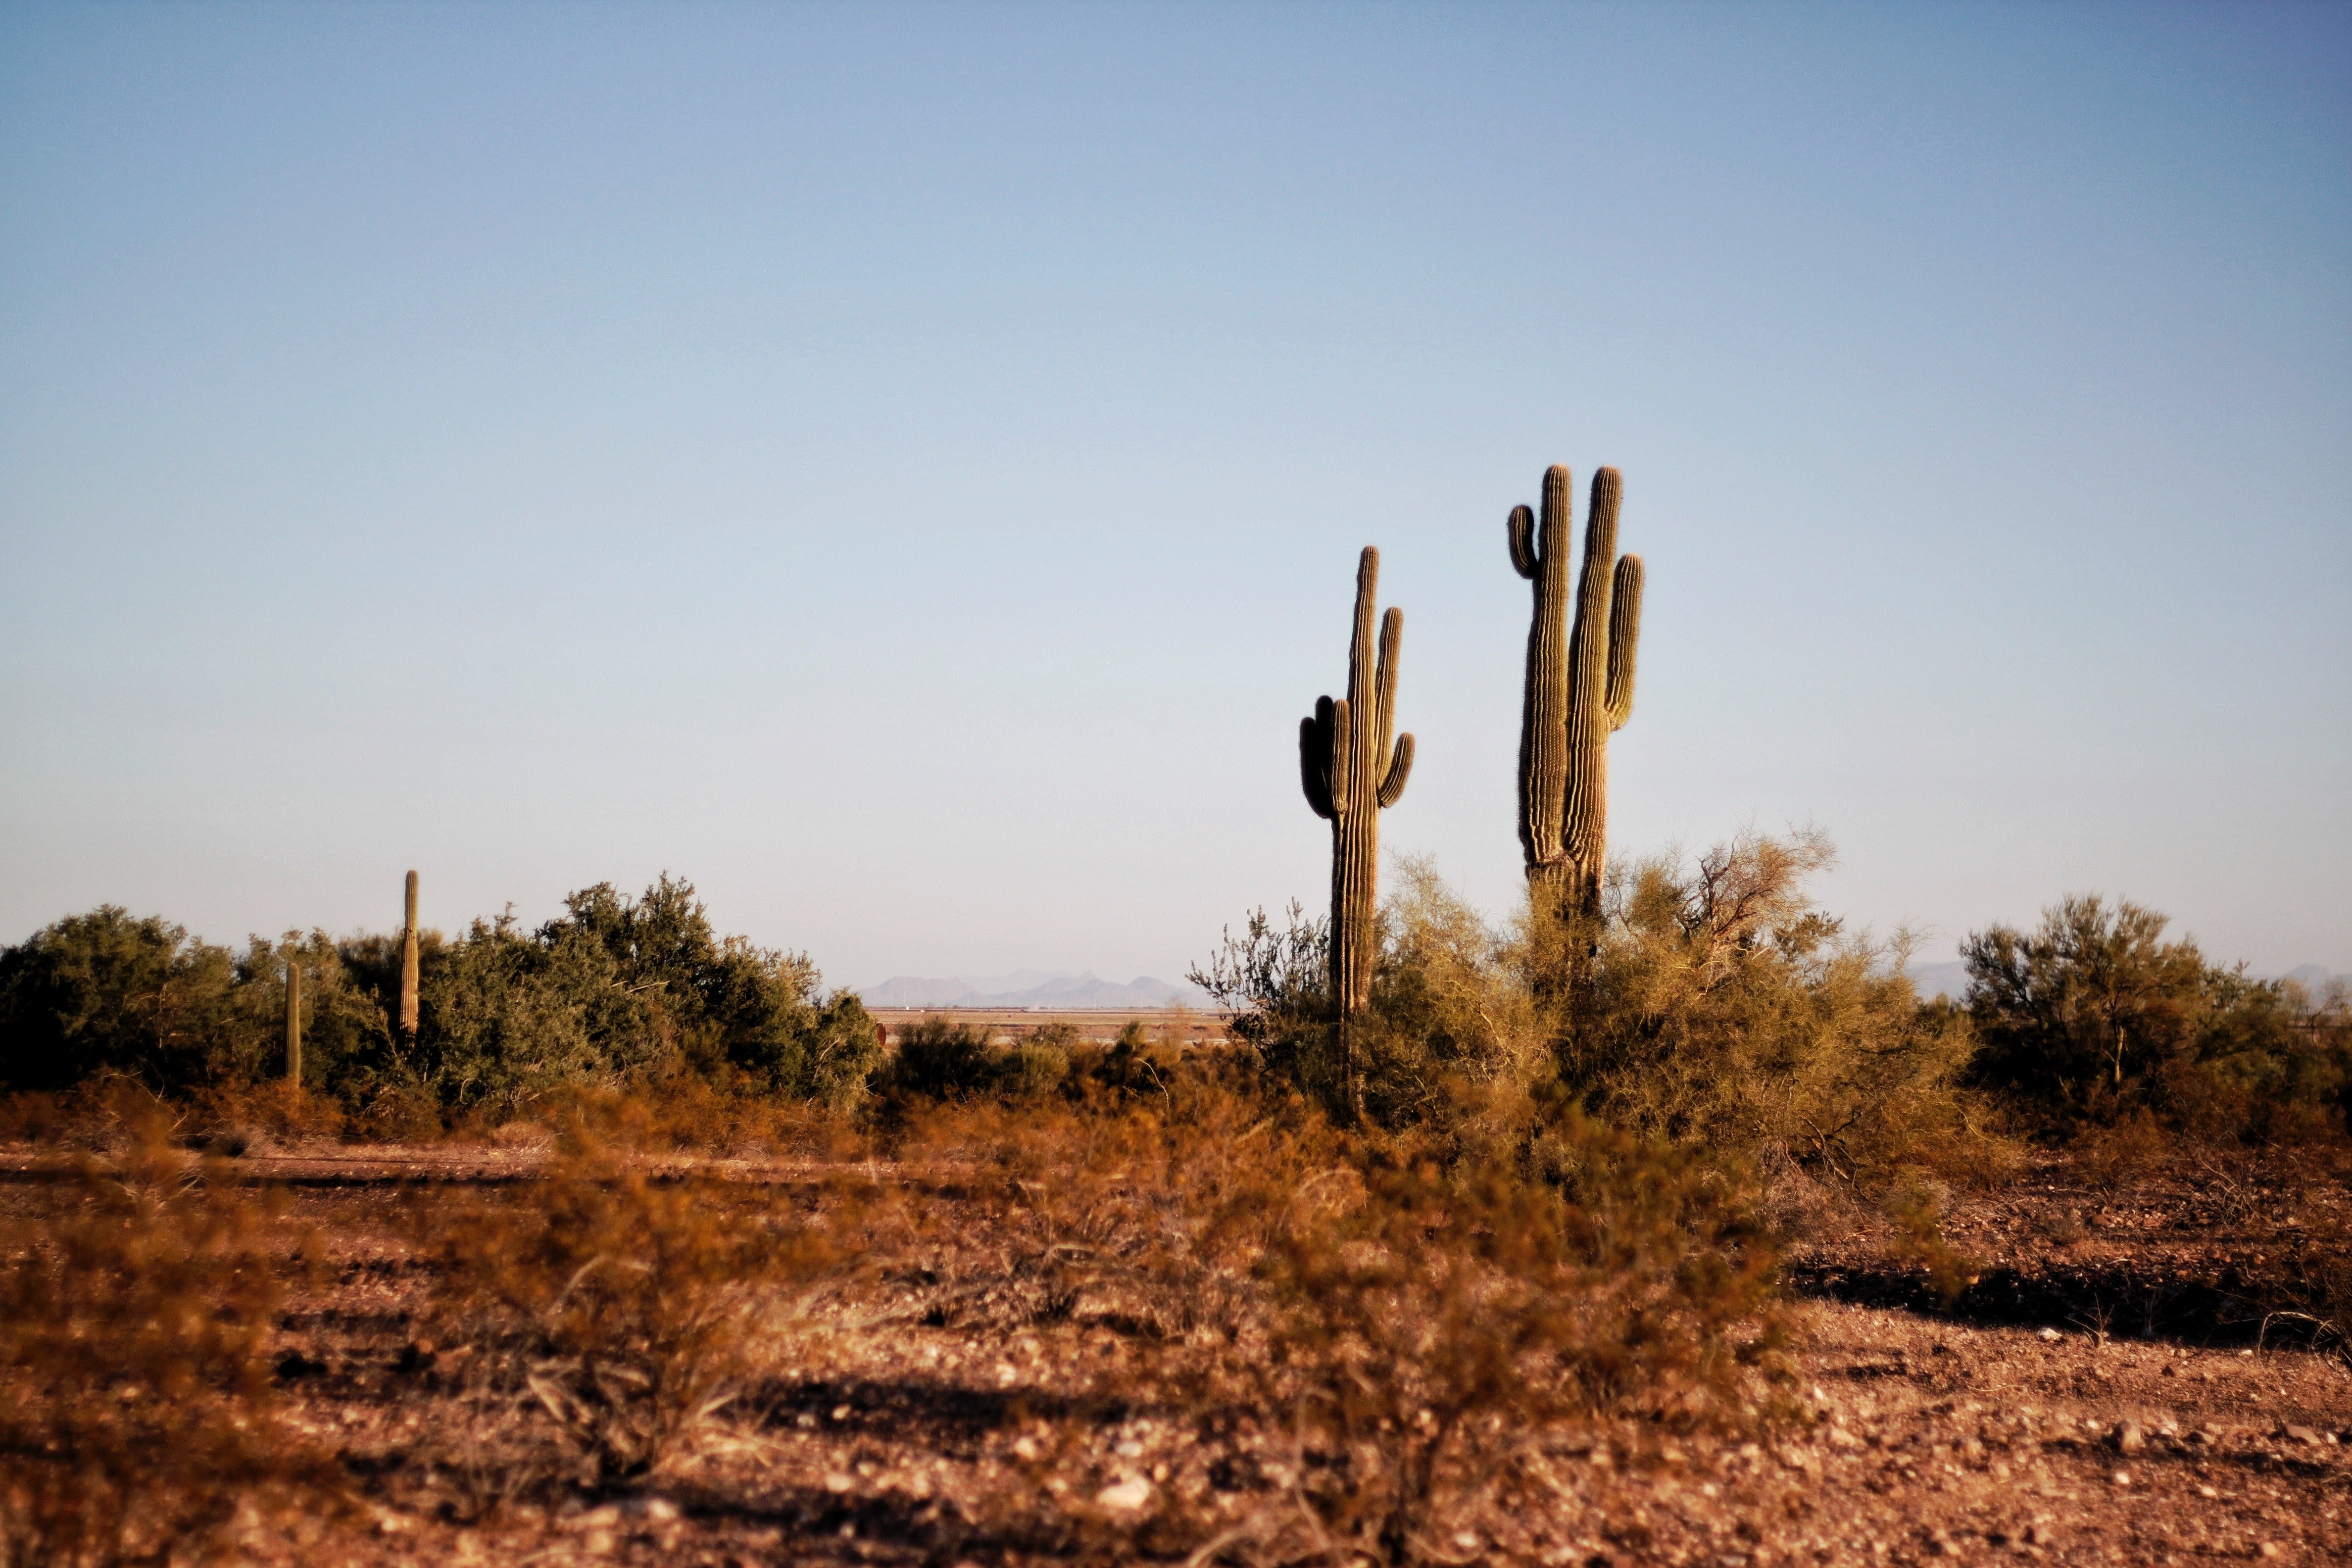 Two cactuses. | Source: Pexels